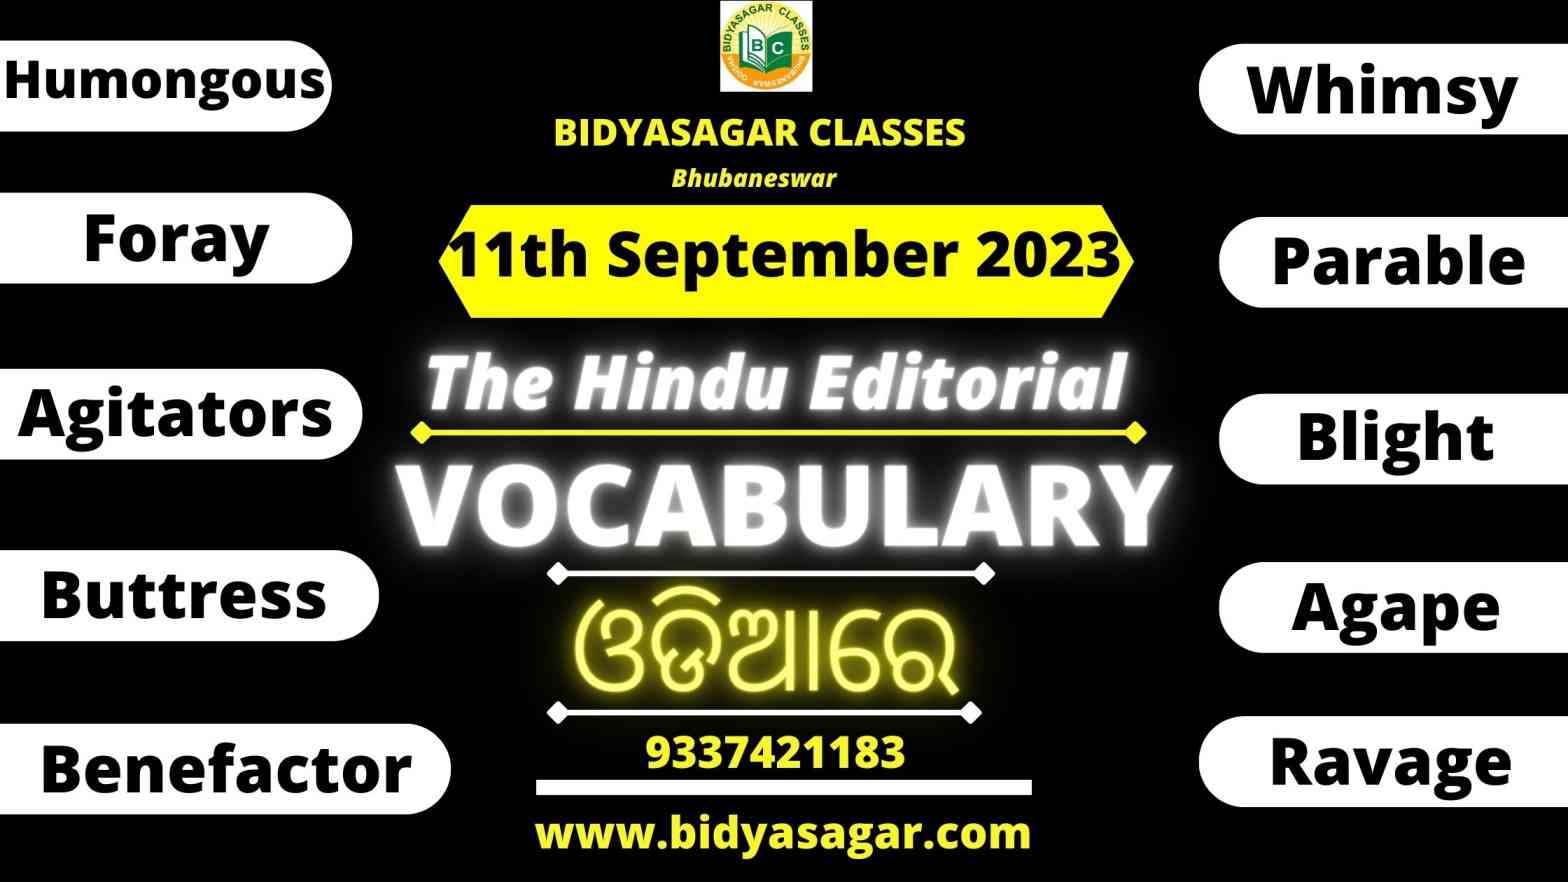 The Hindu Editorial Vocabulary of 11th September 2023